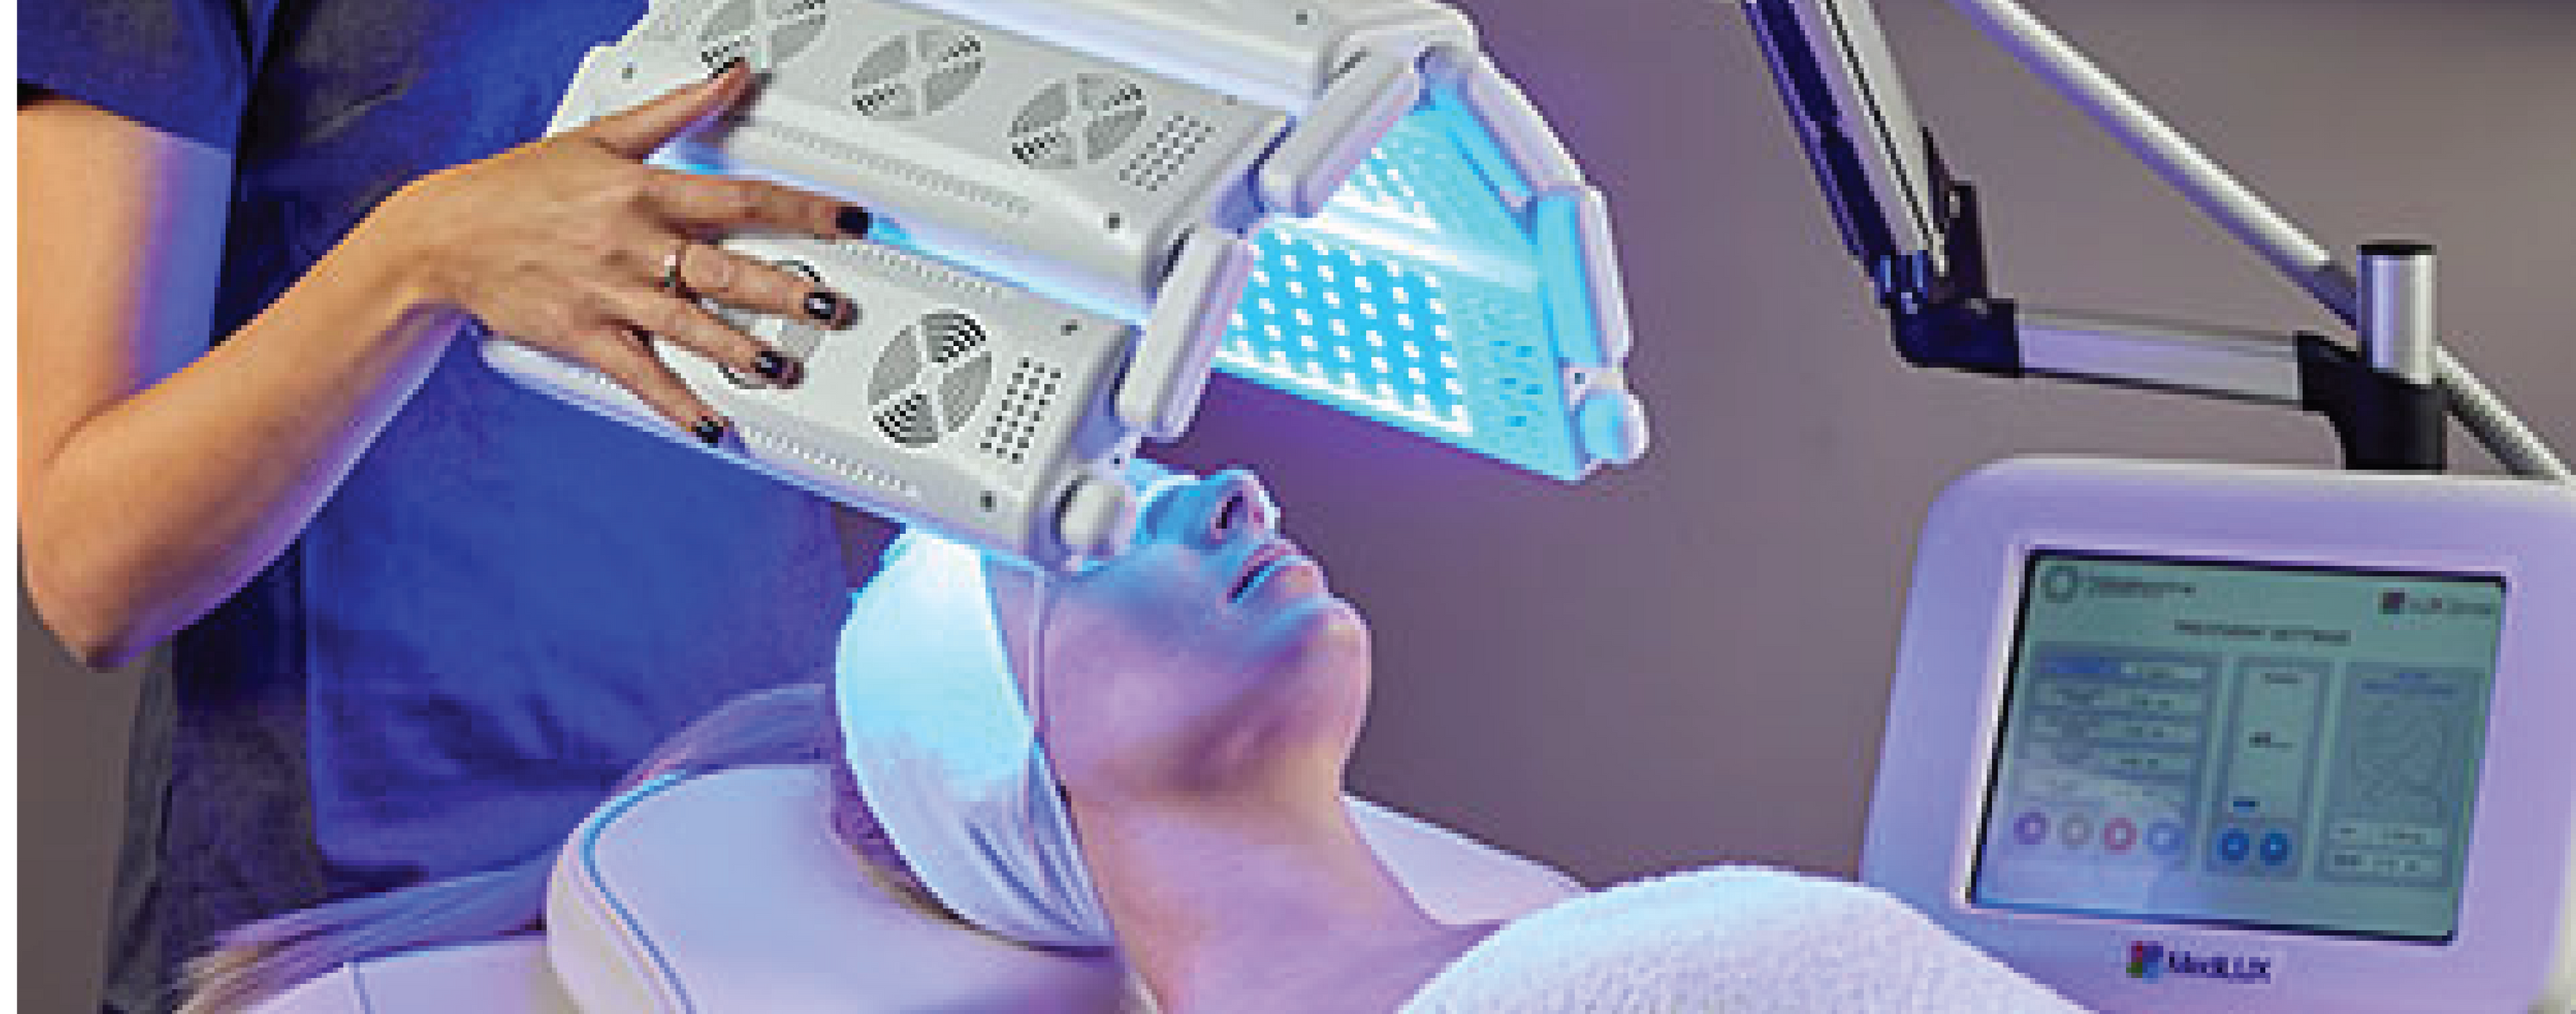 LED MediLUX LIGHT THERAPY